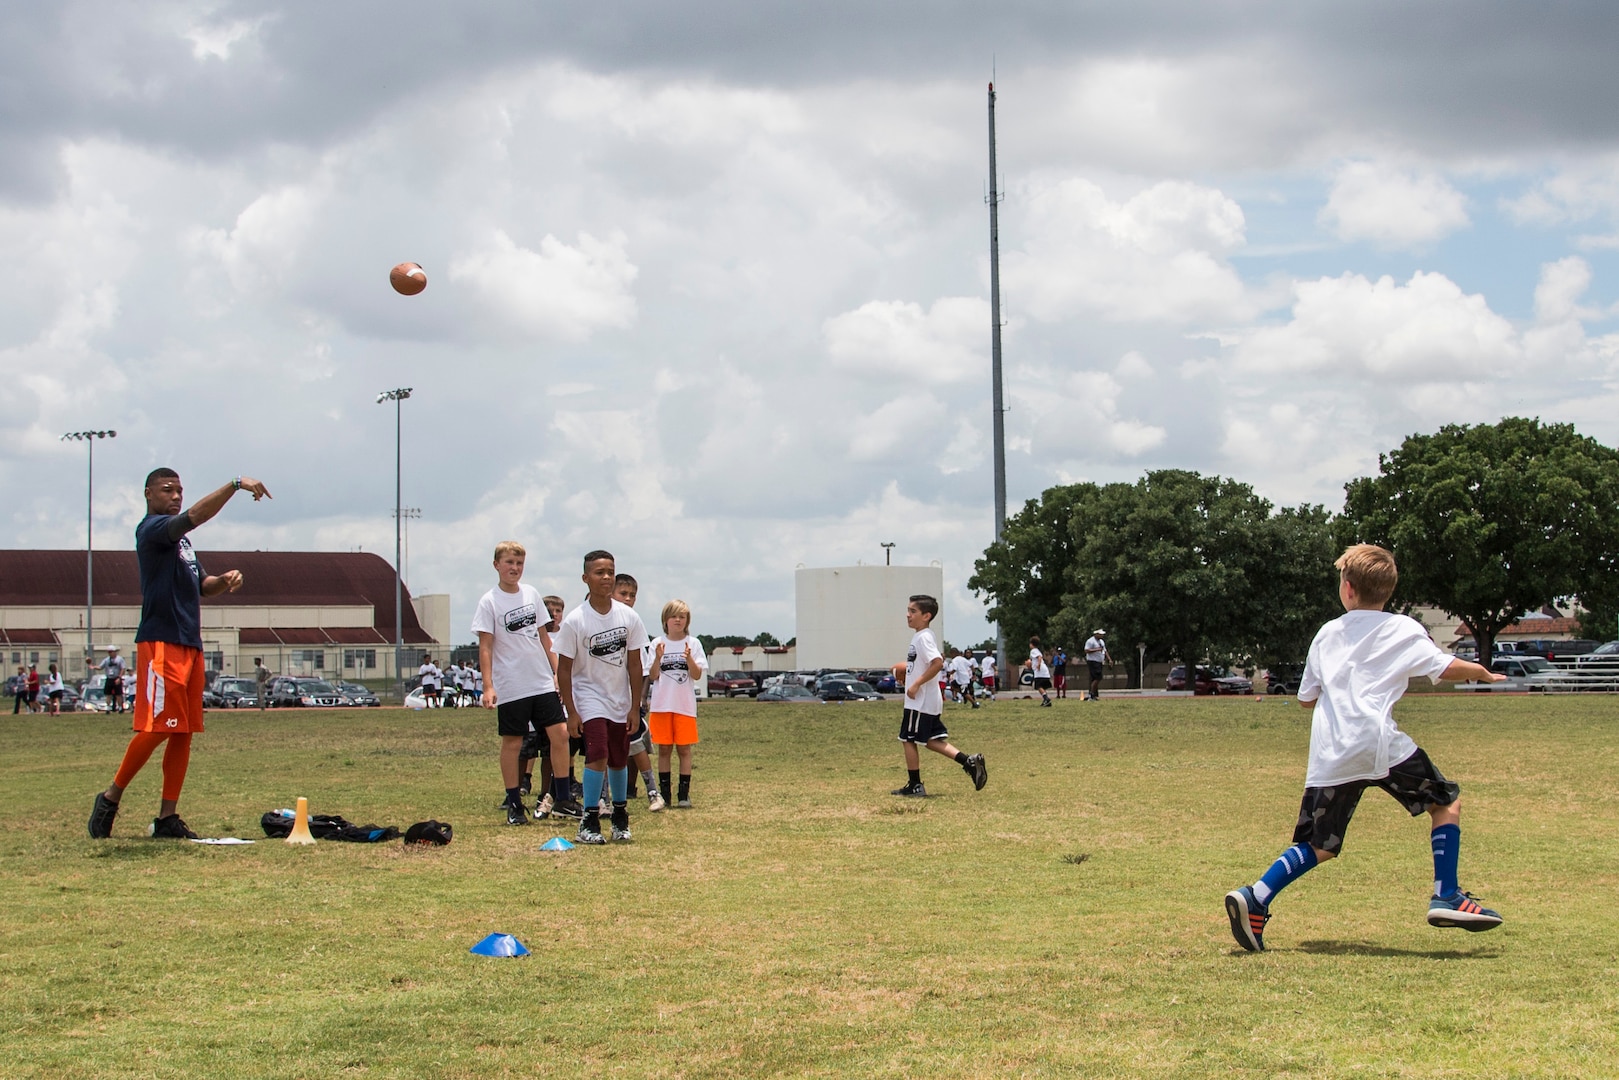 Terrance Williams, Dallas Cowboys wide receiver, throws a pass to a child during a youth football camp June 26, 2017, at Joint Base San Antonio-Randolph. JBSA-Randolph was one of the 11 military communities selected to host a 2017 ProCamps football event. (U.S. Air Force photo by Senior Airman Stormy Archer)